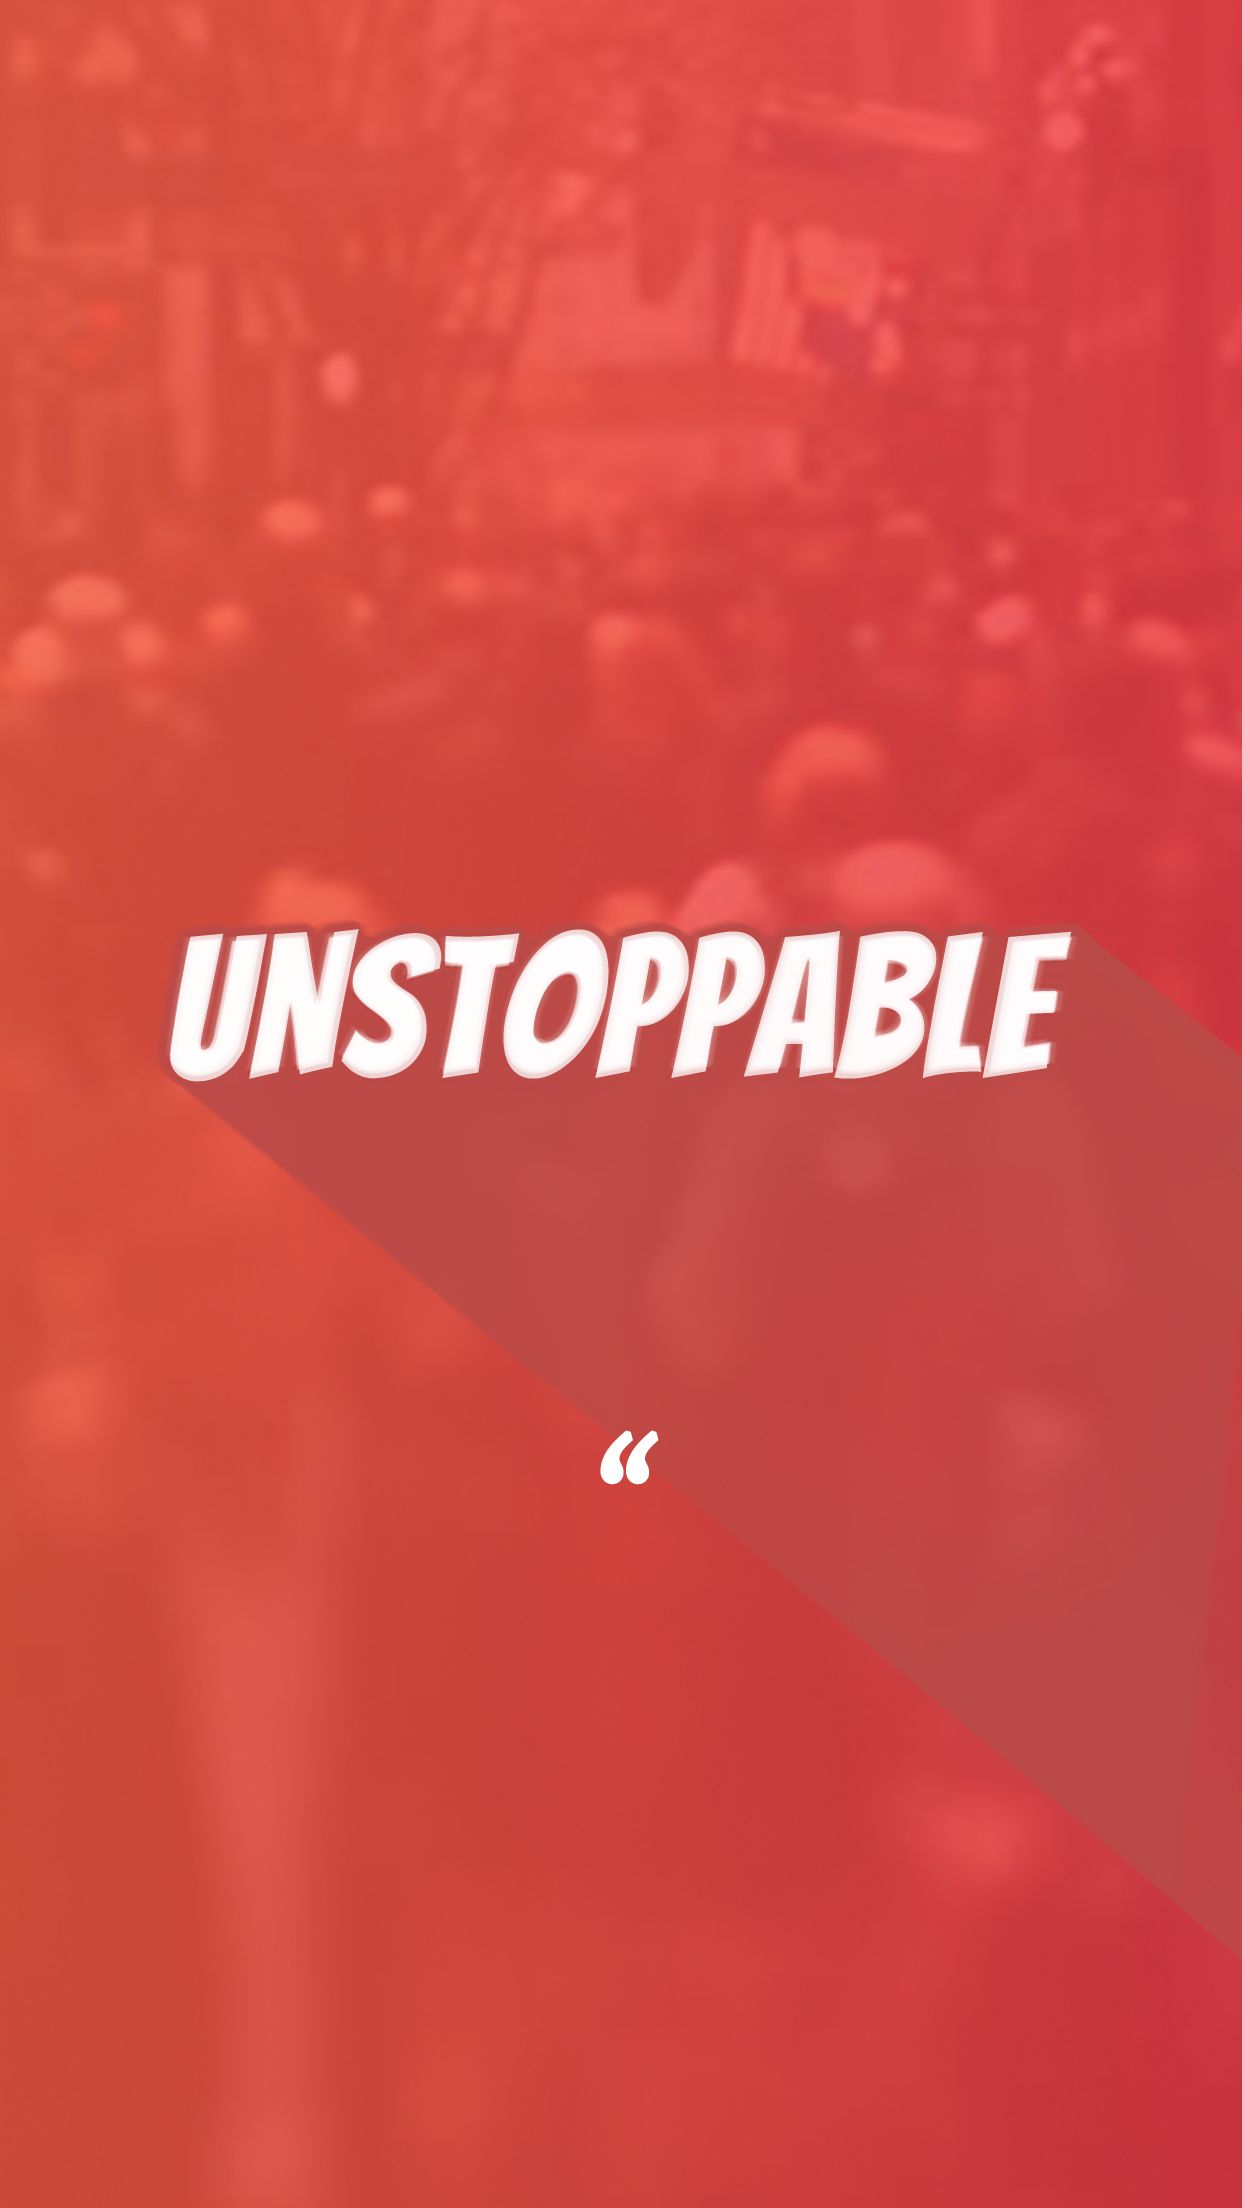 Free download unstoppable wallpaper iphone typography minimal